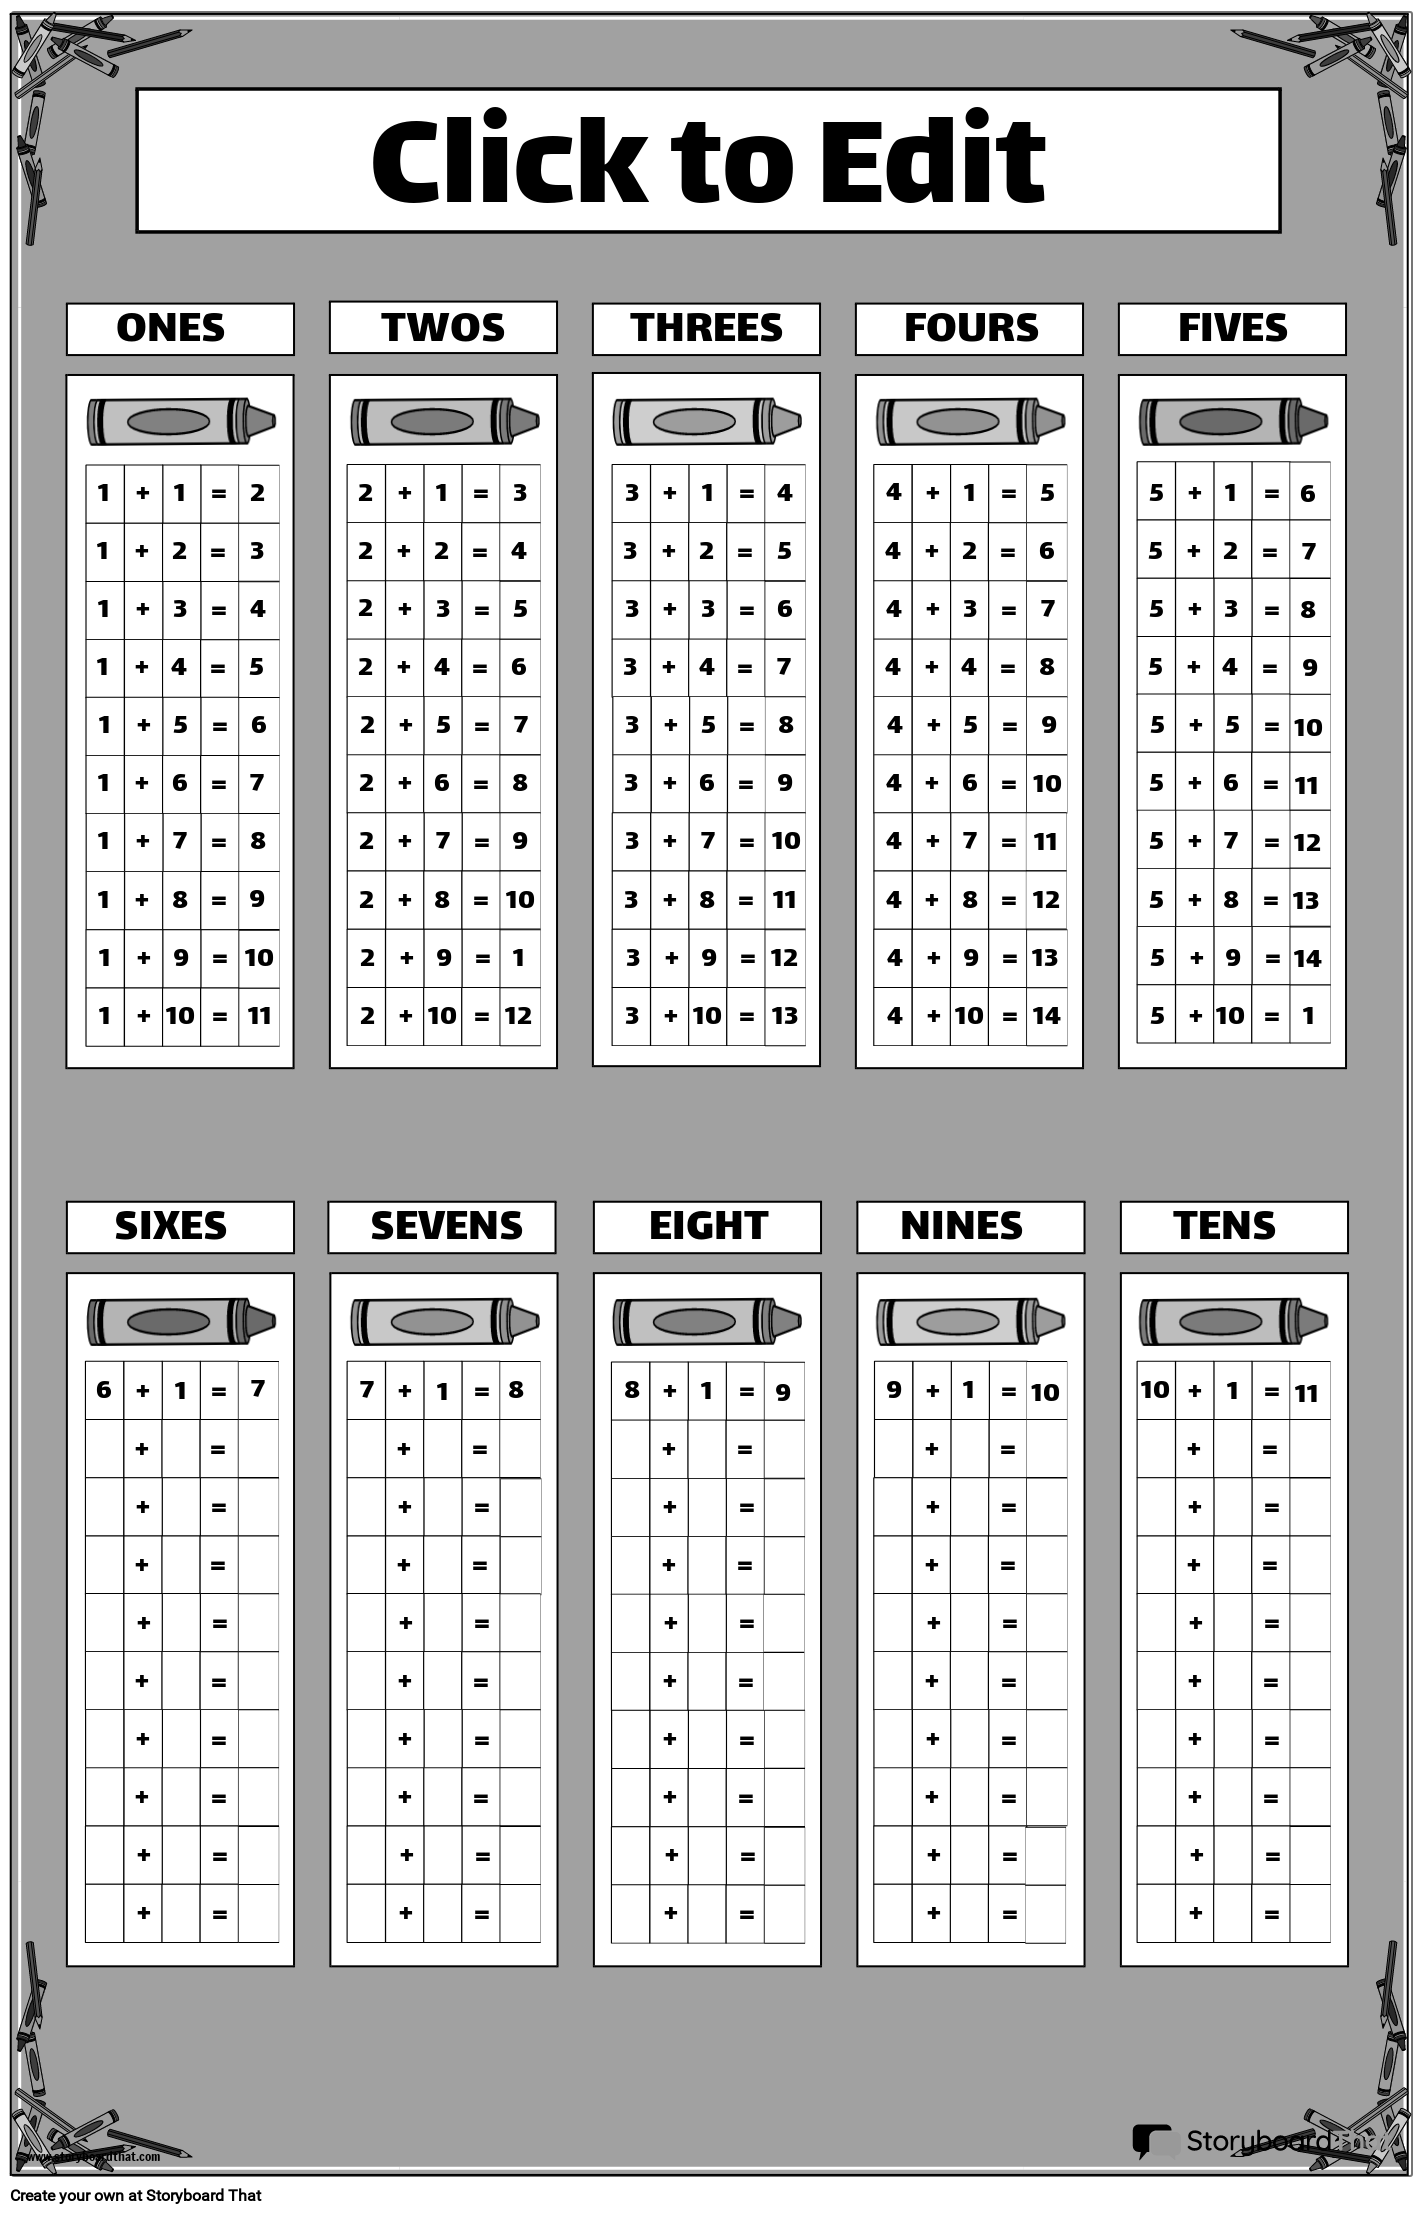 Print-ready Addition Charts Poster with Crayons Motif B&W